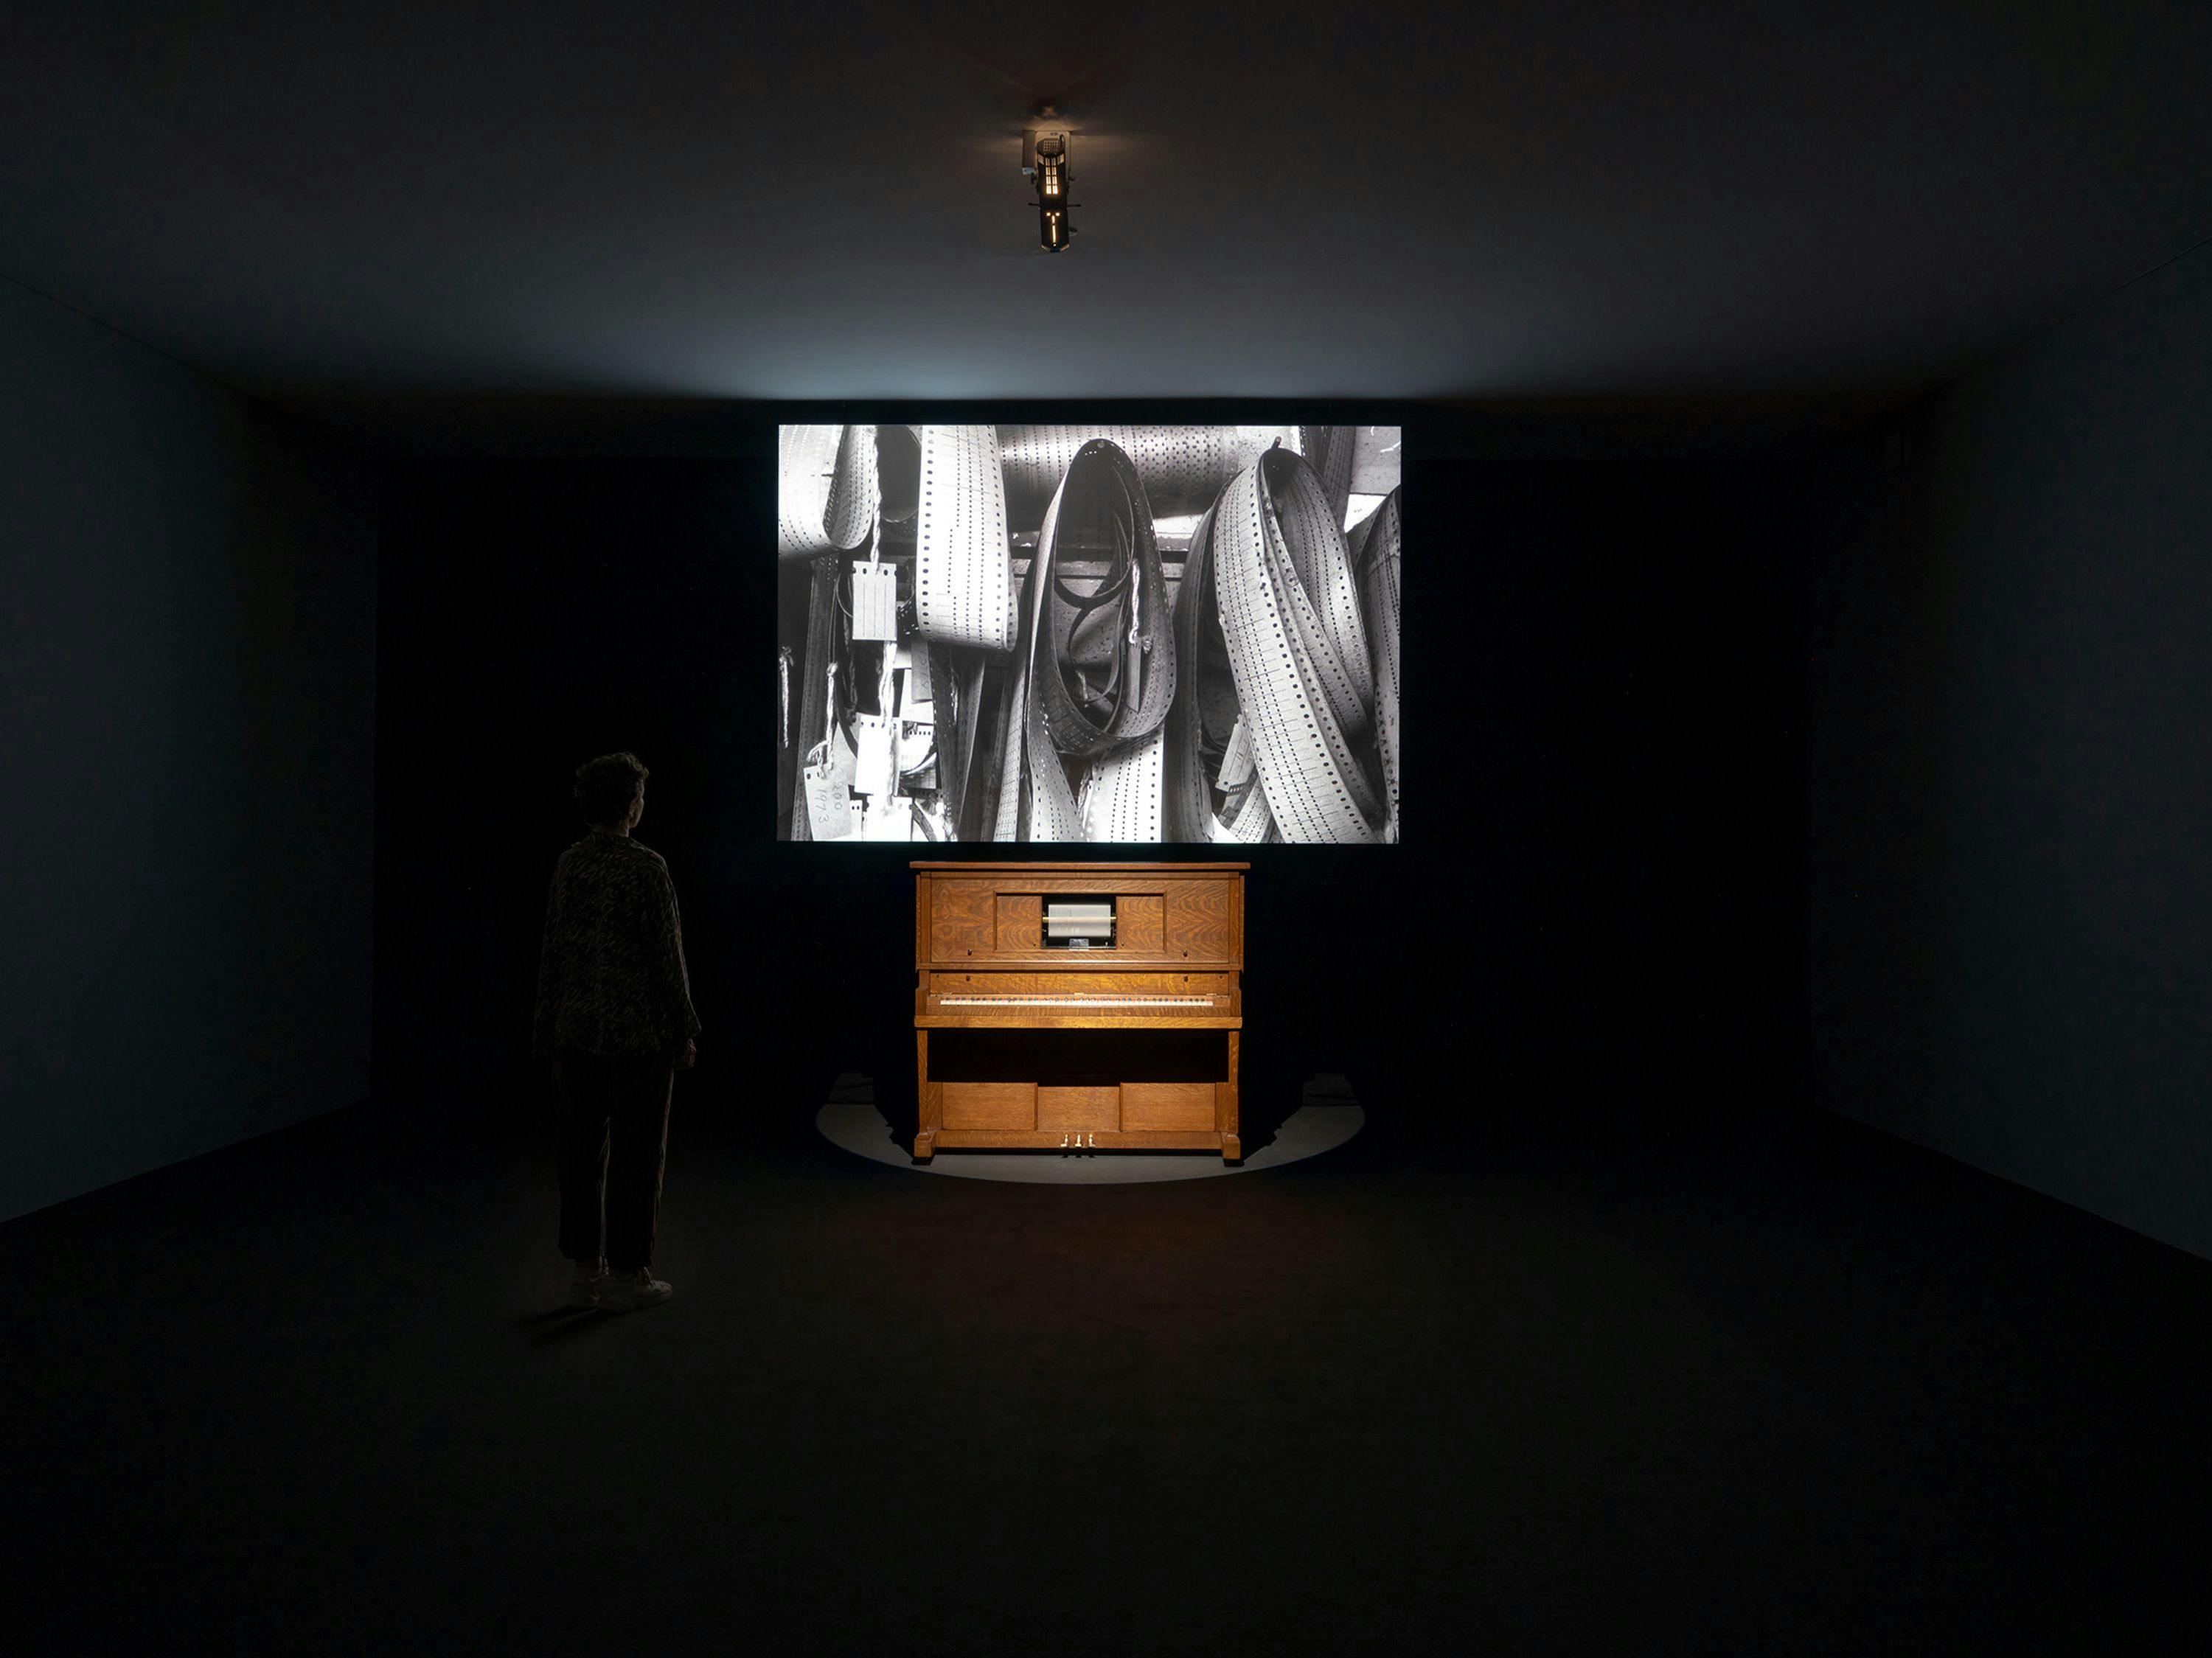 An installation view of a mixed media video by Stan Douglas Onomatopoeia, 1985 to 1986.